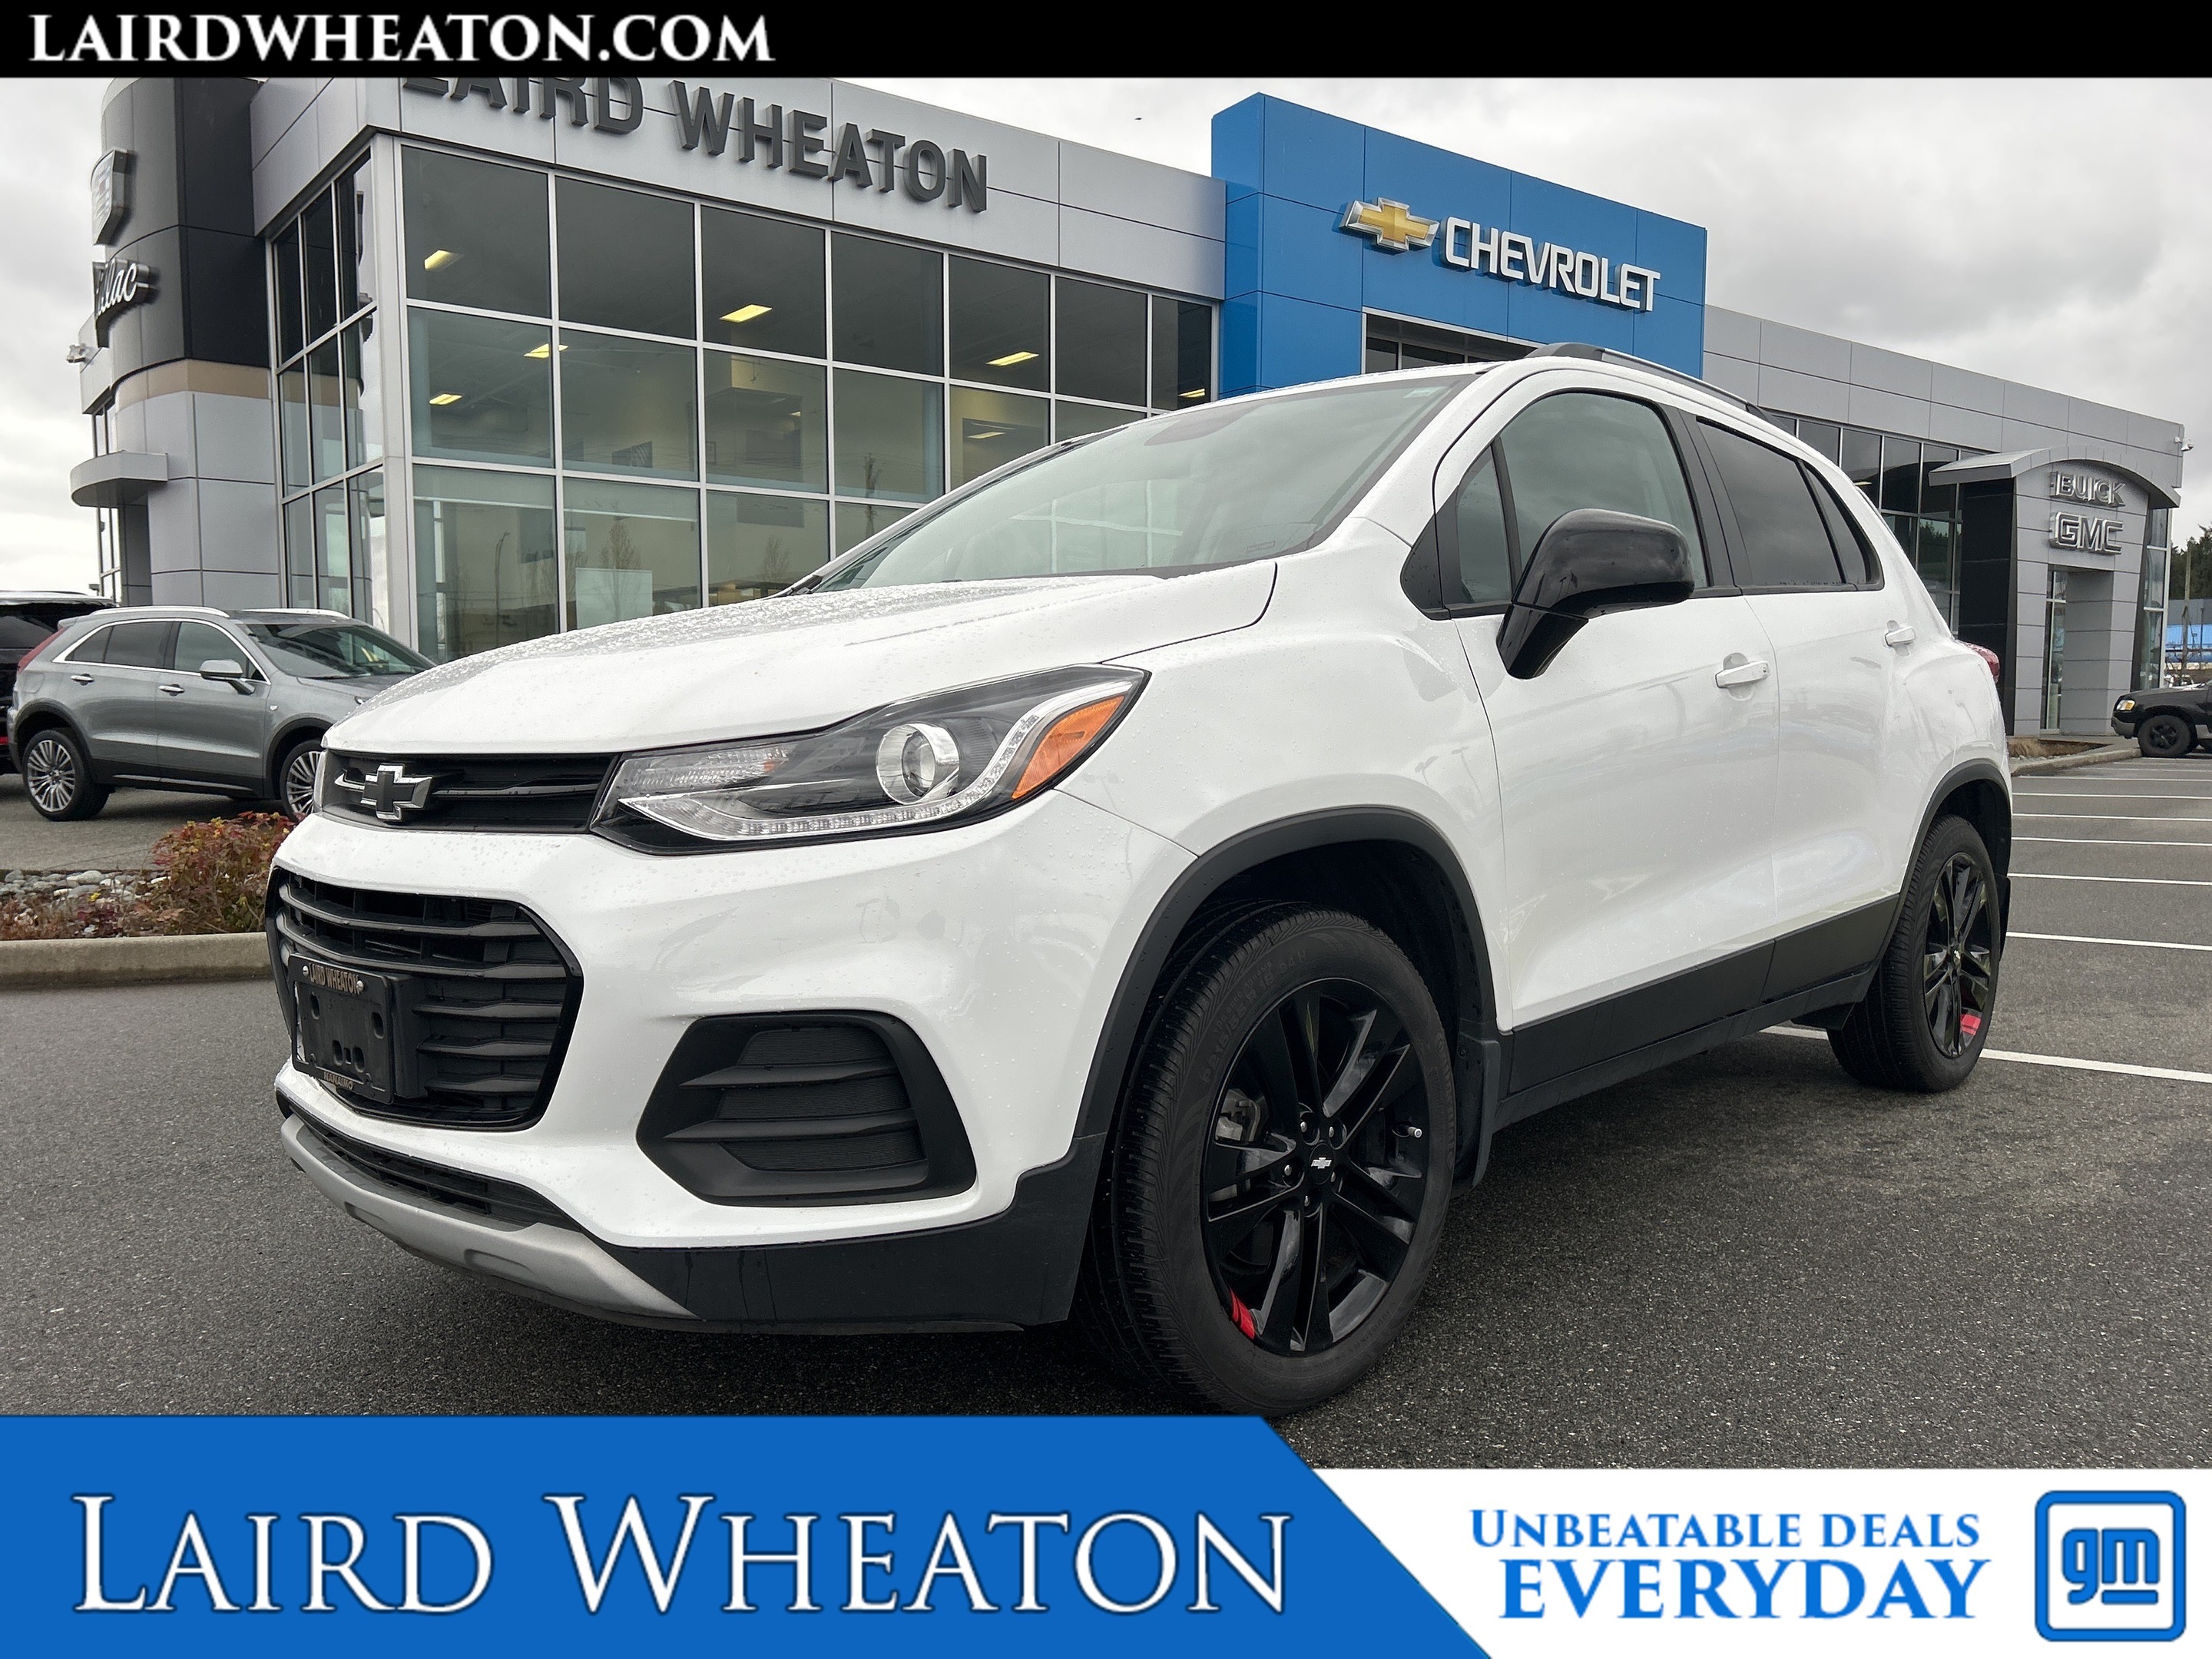 2019 Chevrolet Trax LT AWD, Only 22,005K's, Power Group, Turbocharged